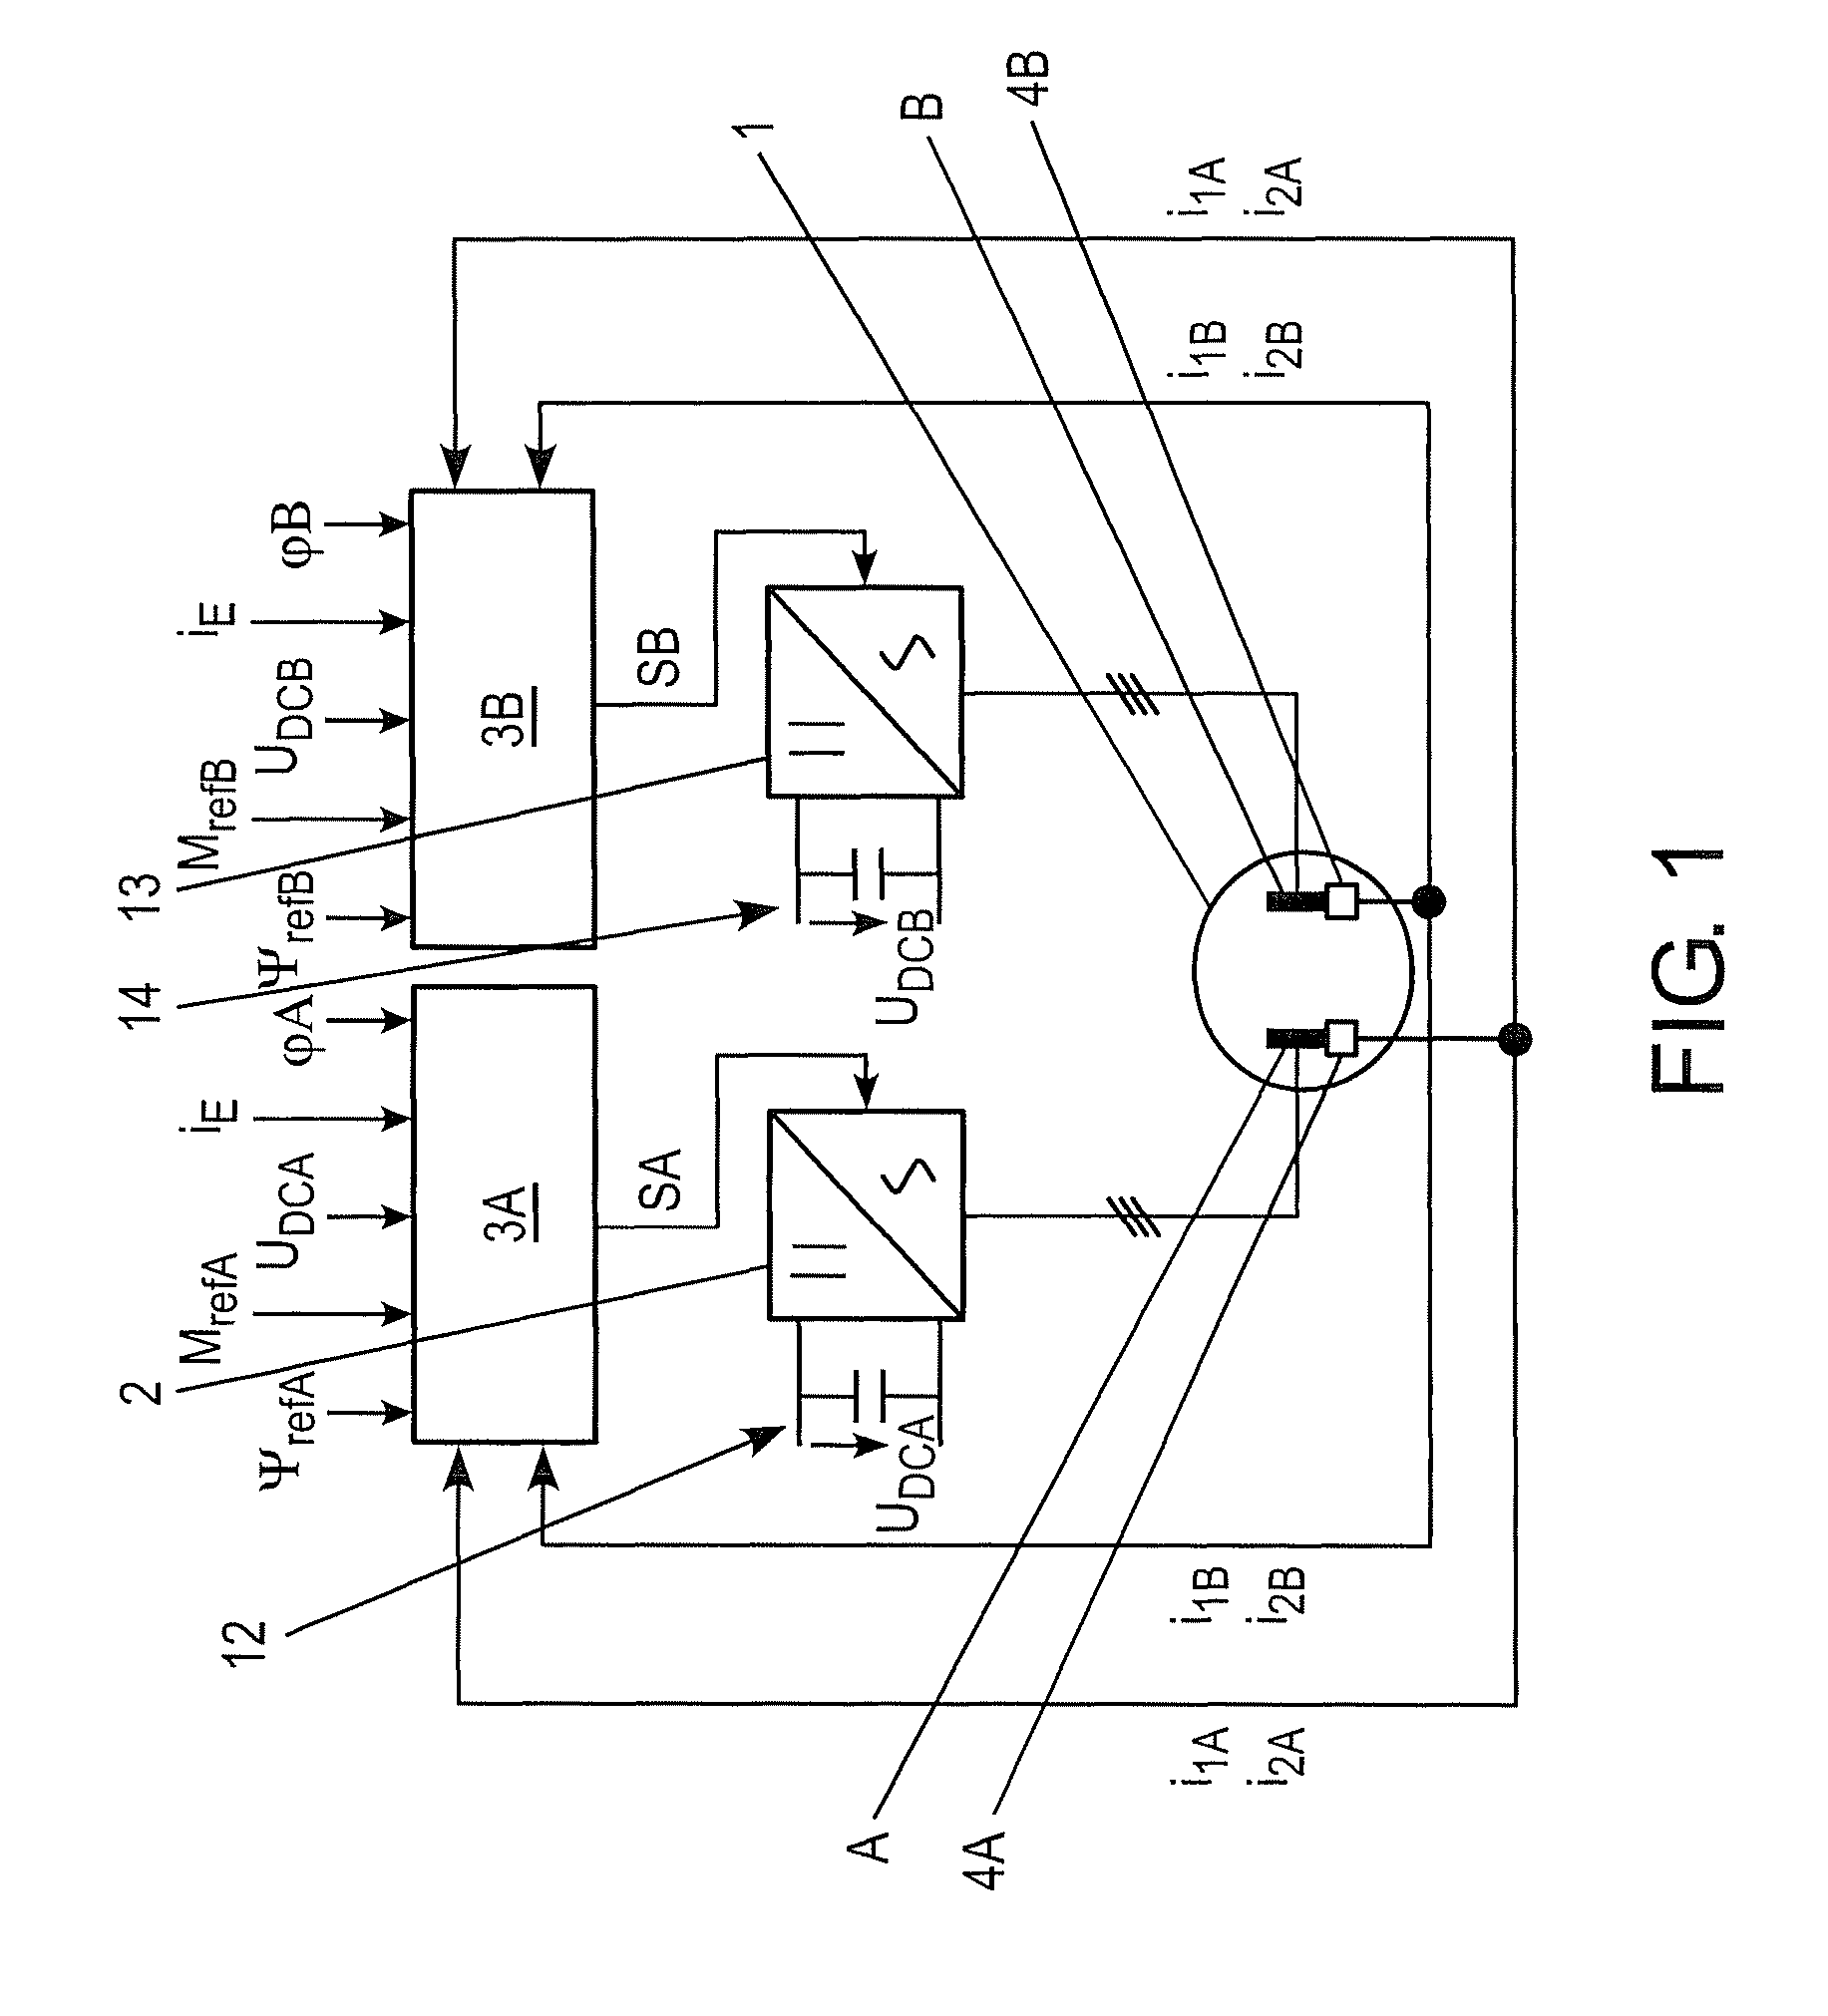 Method for operation of a three-phase rotating electrical machine, and an apparatus for carrying out the method